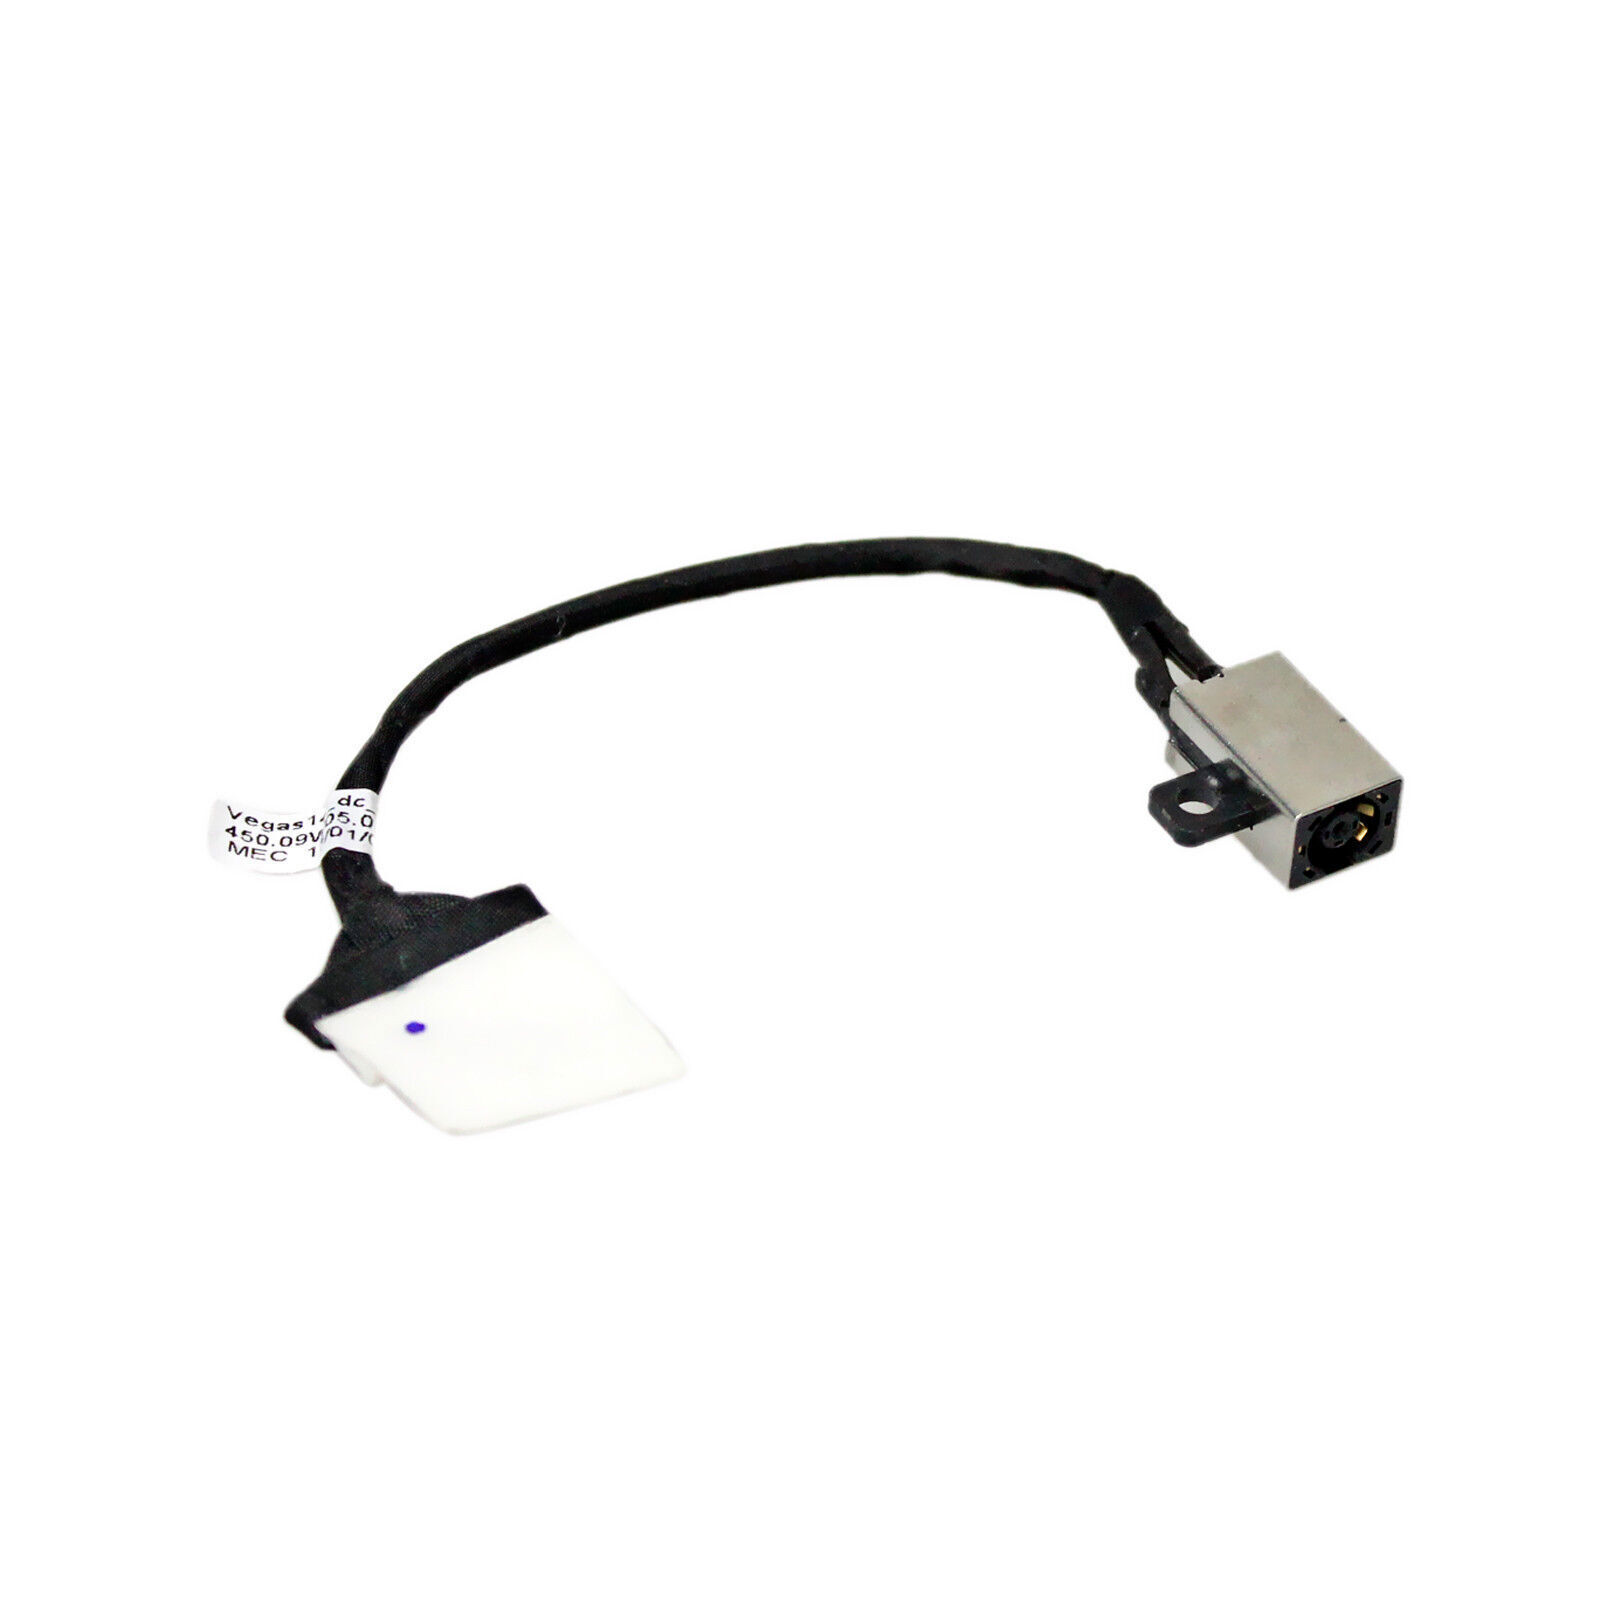 AC DC Jack Power Cable For Dell Inspiron 15 3567 FWGMM 0FWGMM Plug Charging Port